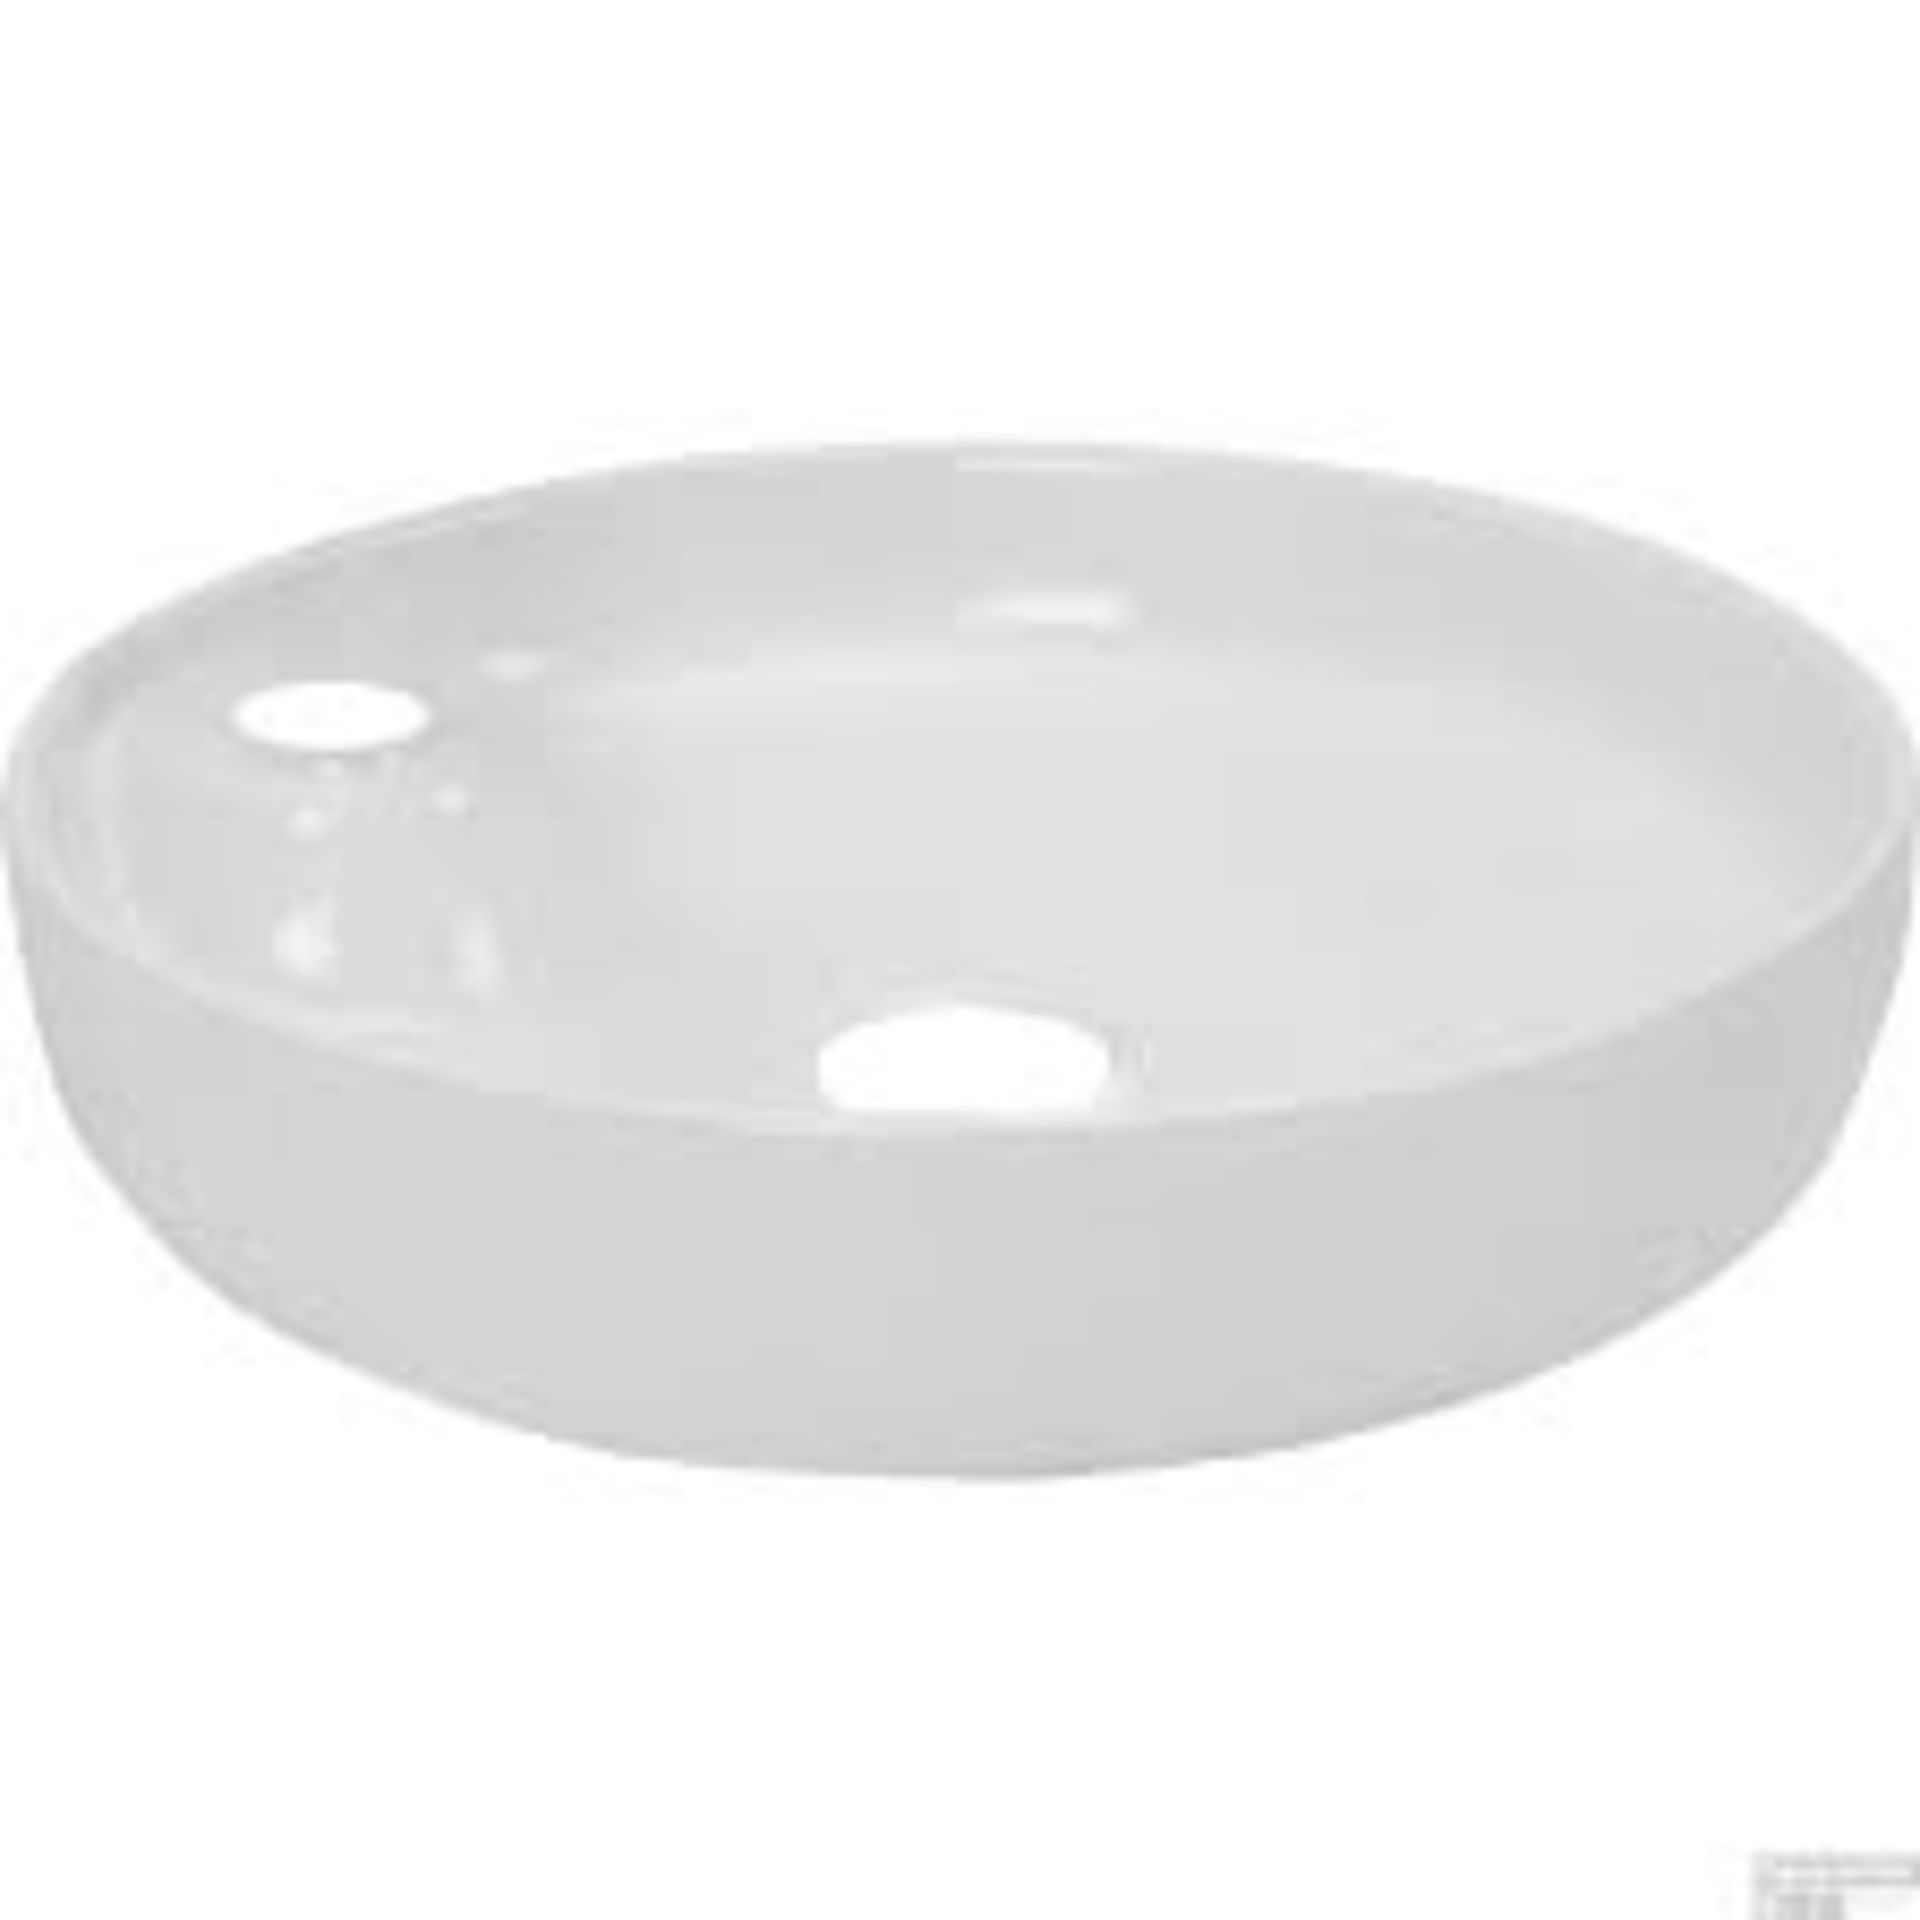 Boxed Go by Van Mark Cupido Sink RRP £140 (13413) (Public Viewing and Appraisals Available)